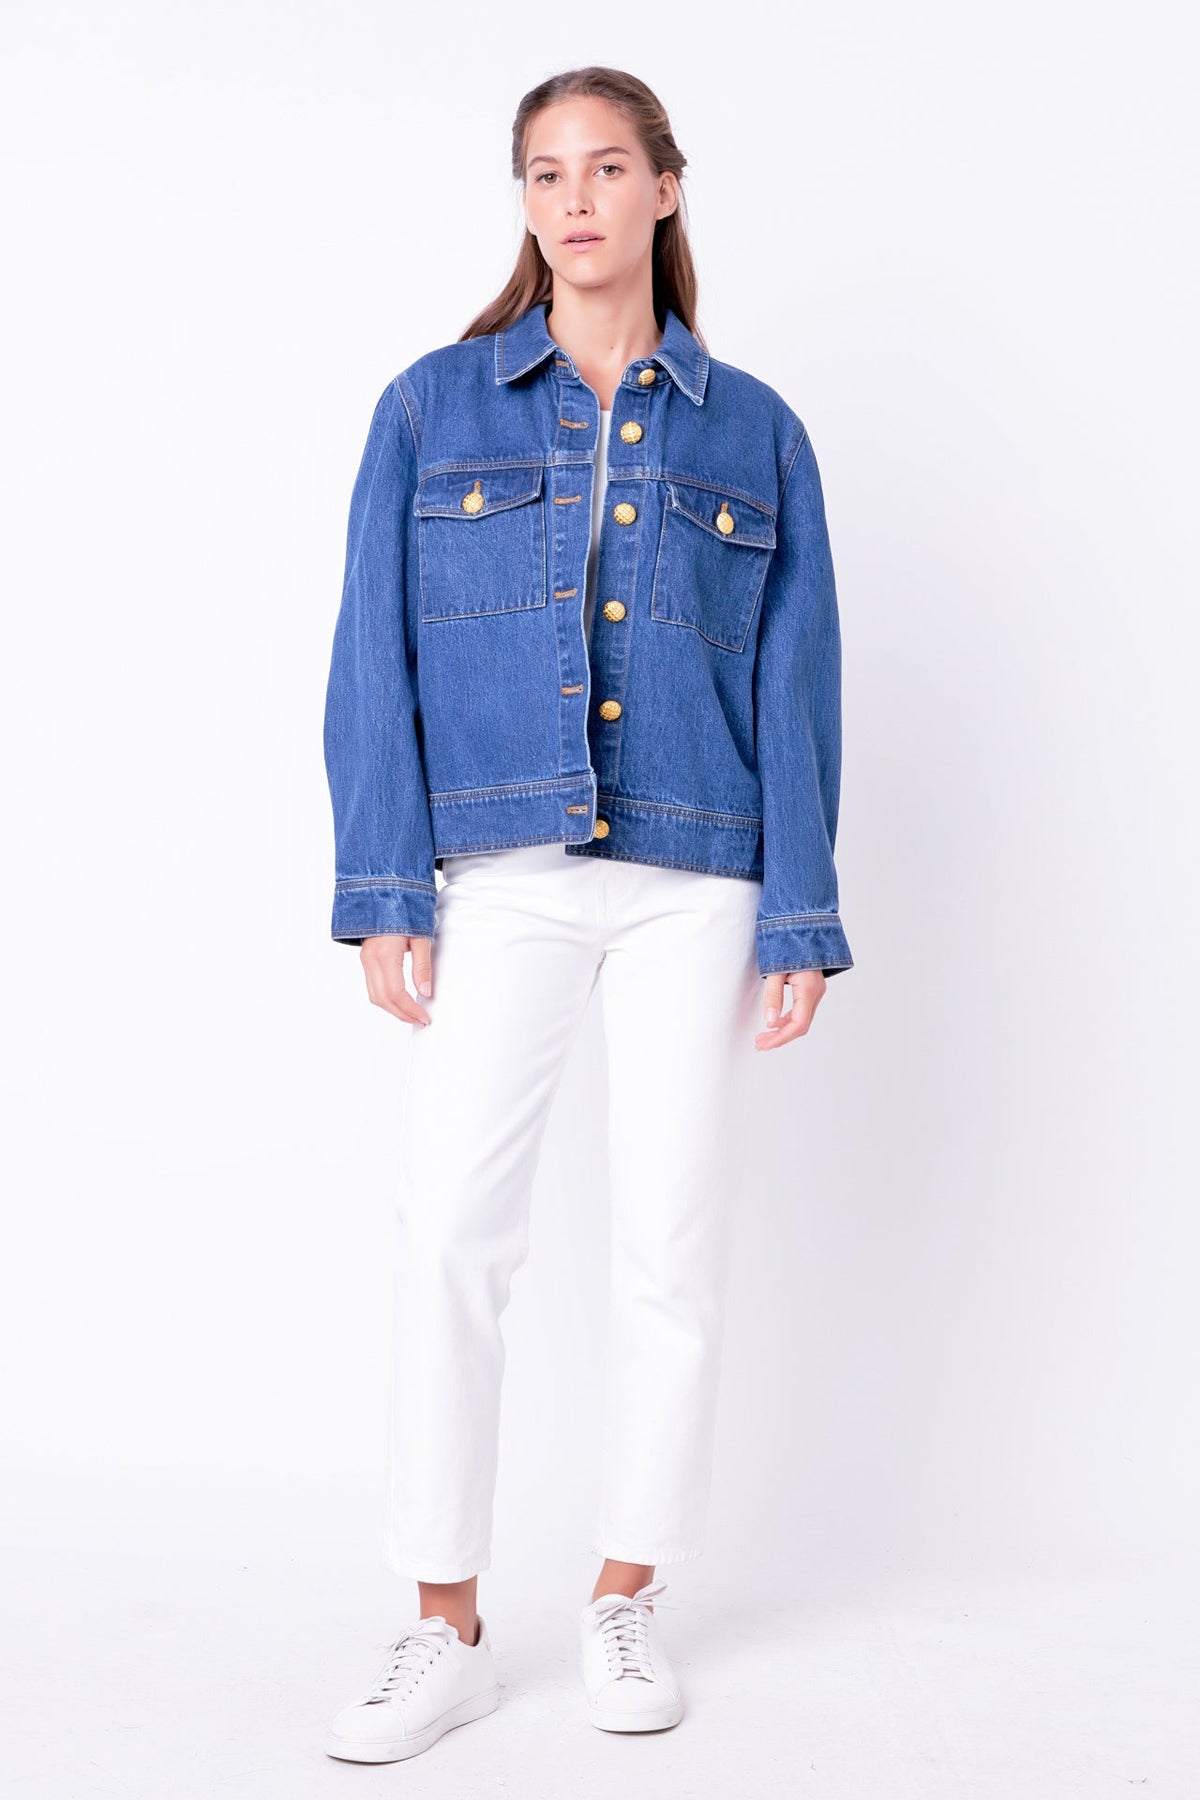 ENGLISH FACTORY - Denim Jacket With Brass Buttons - JACKETS available at Objectrare